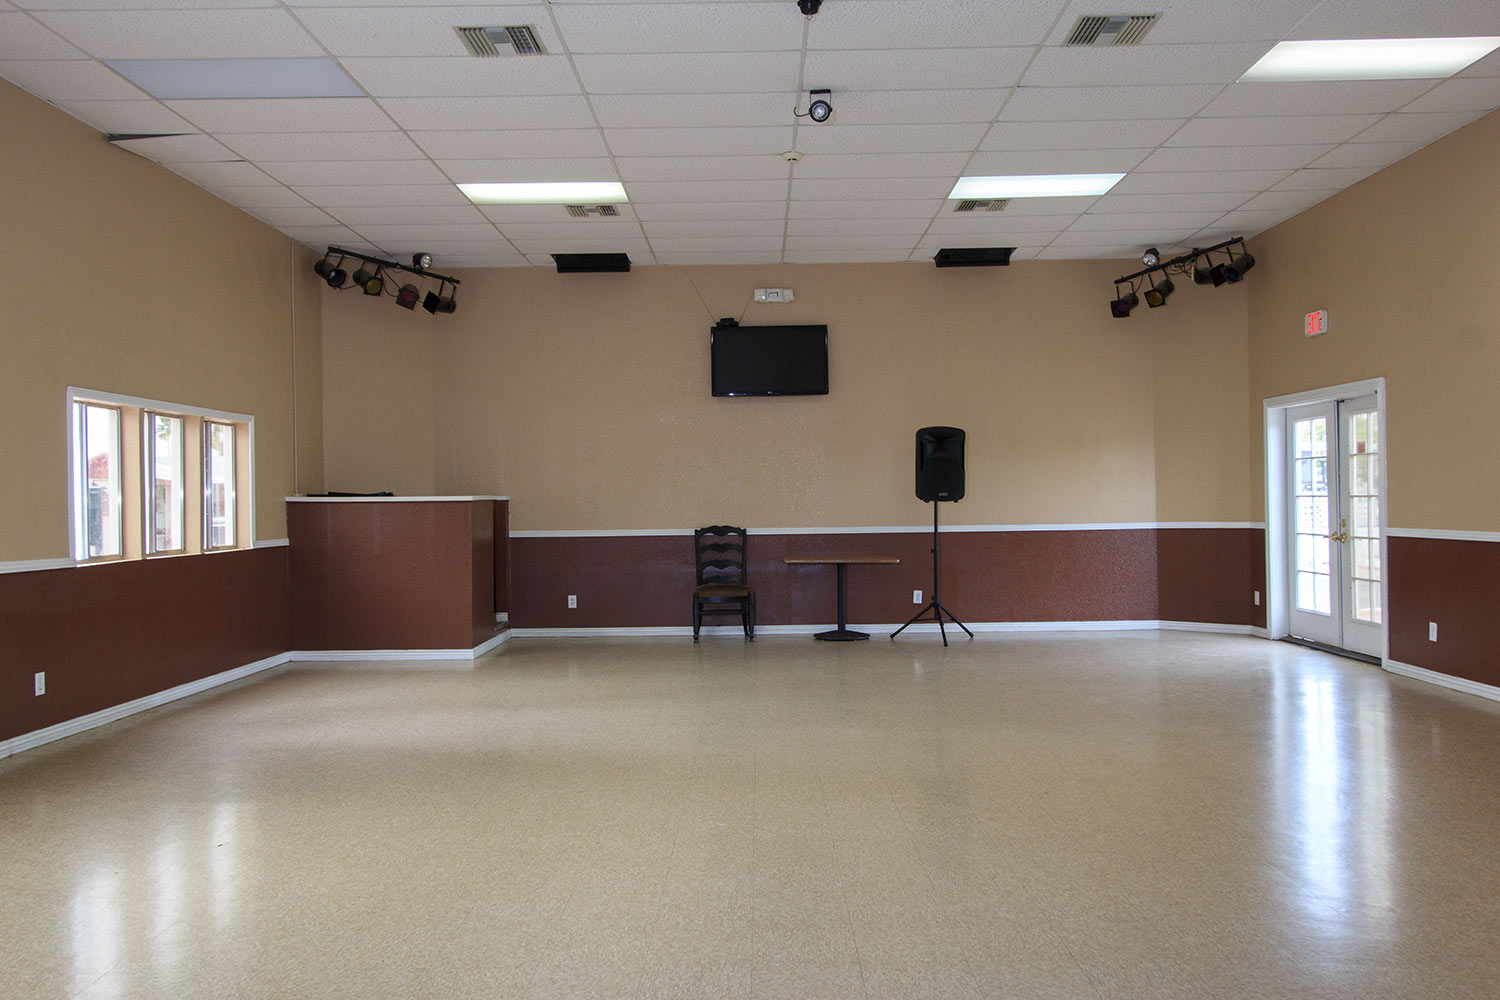 An open floor set up for dances with lights hung from ceiling, loud speaker and flat screen TV mounted to wall